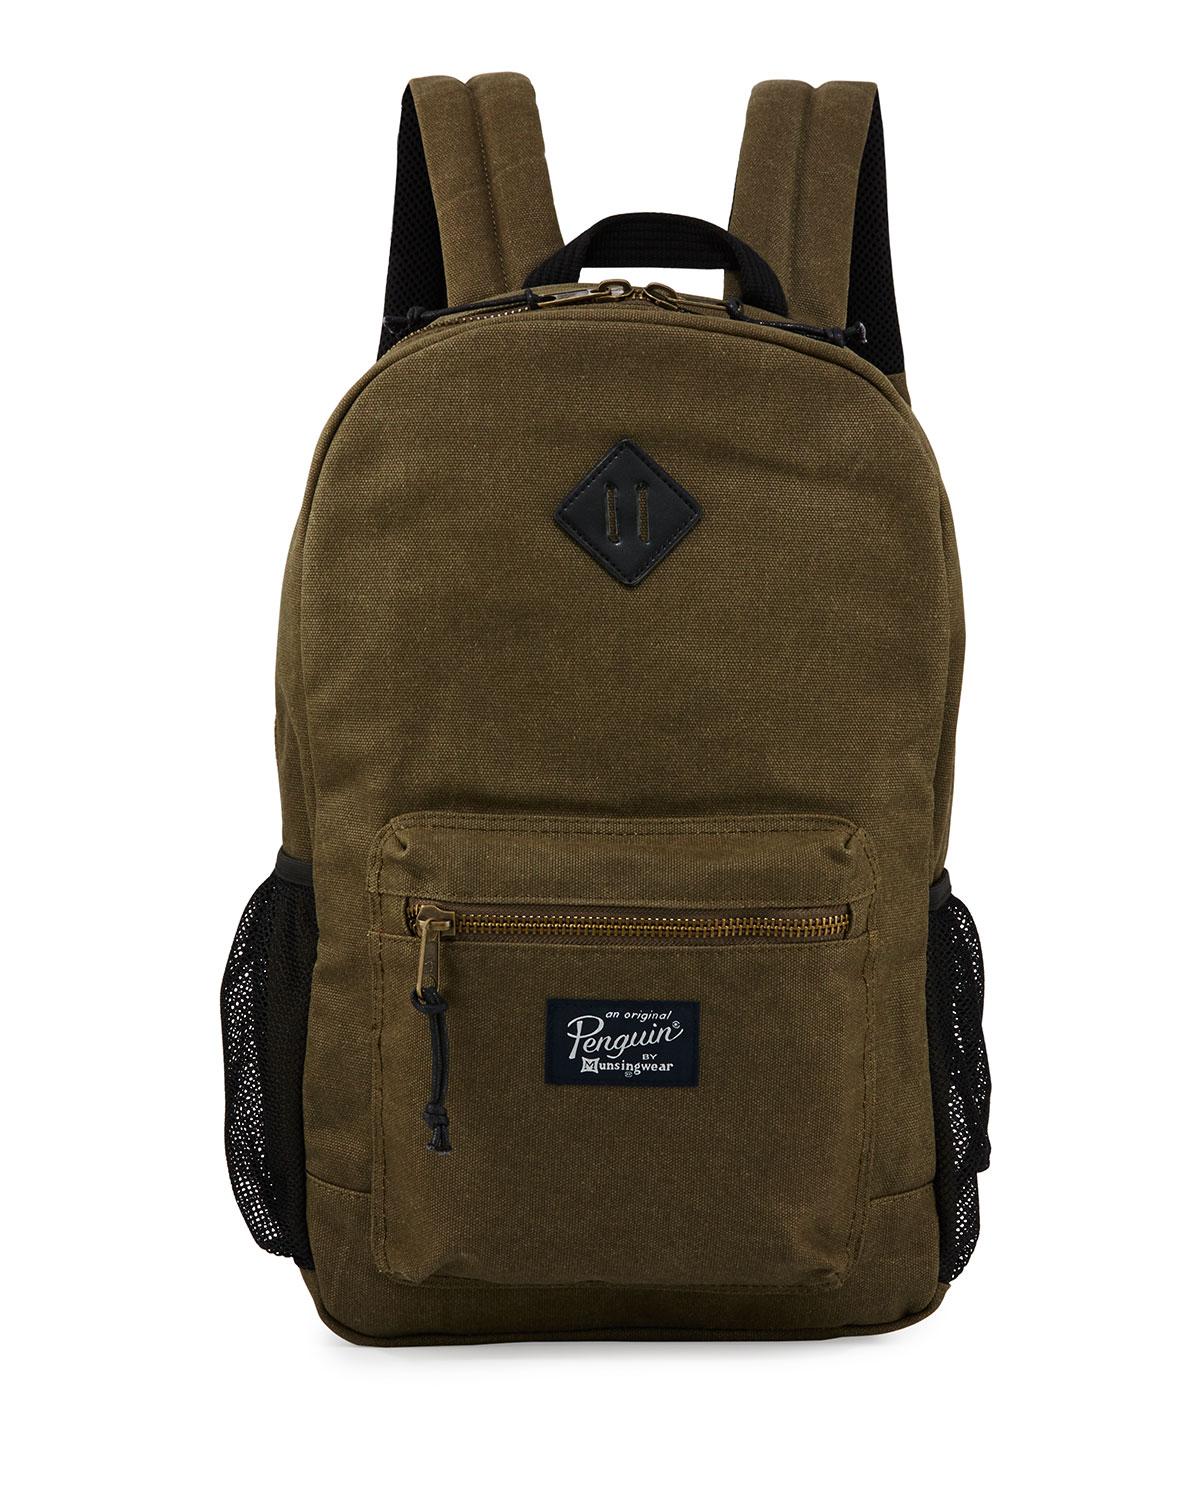 Original Penguin Waxed Canvas Backpack in Green - Lyst